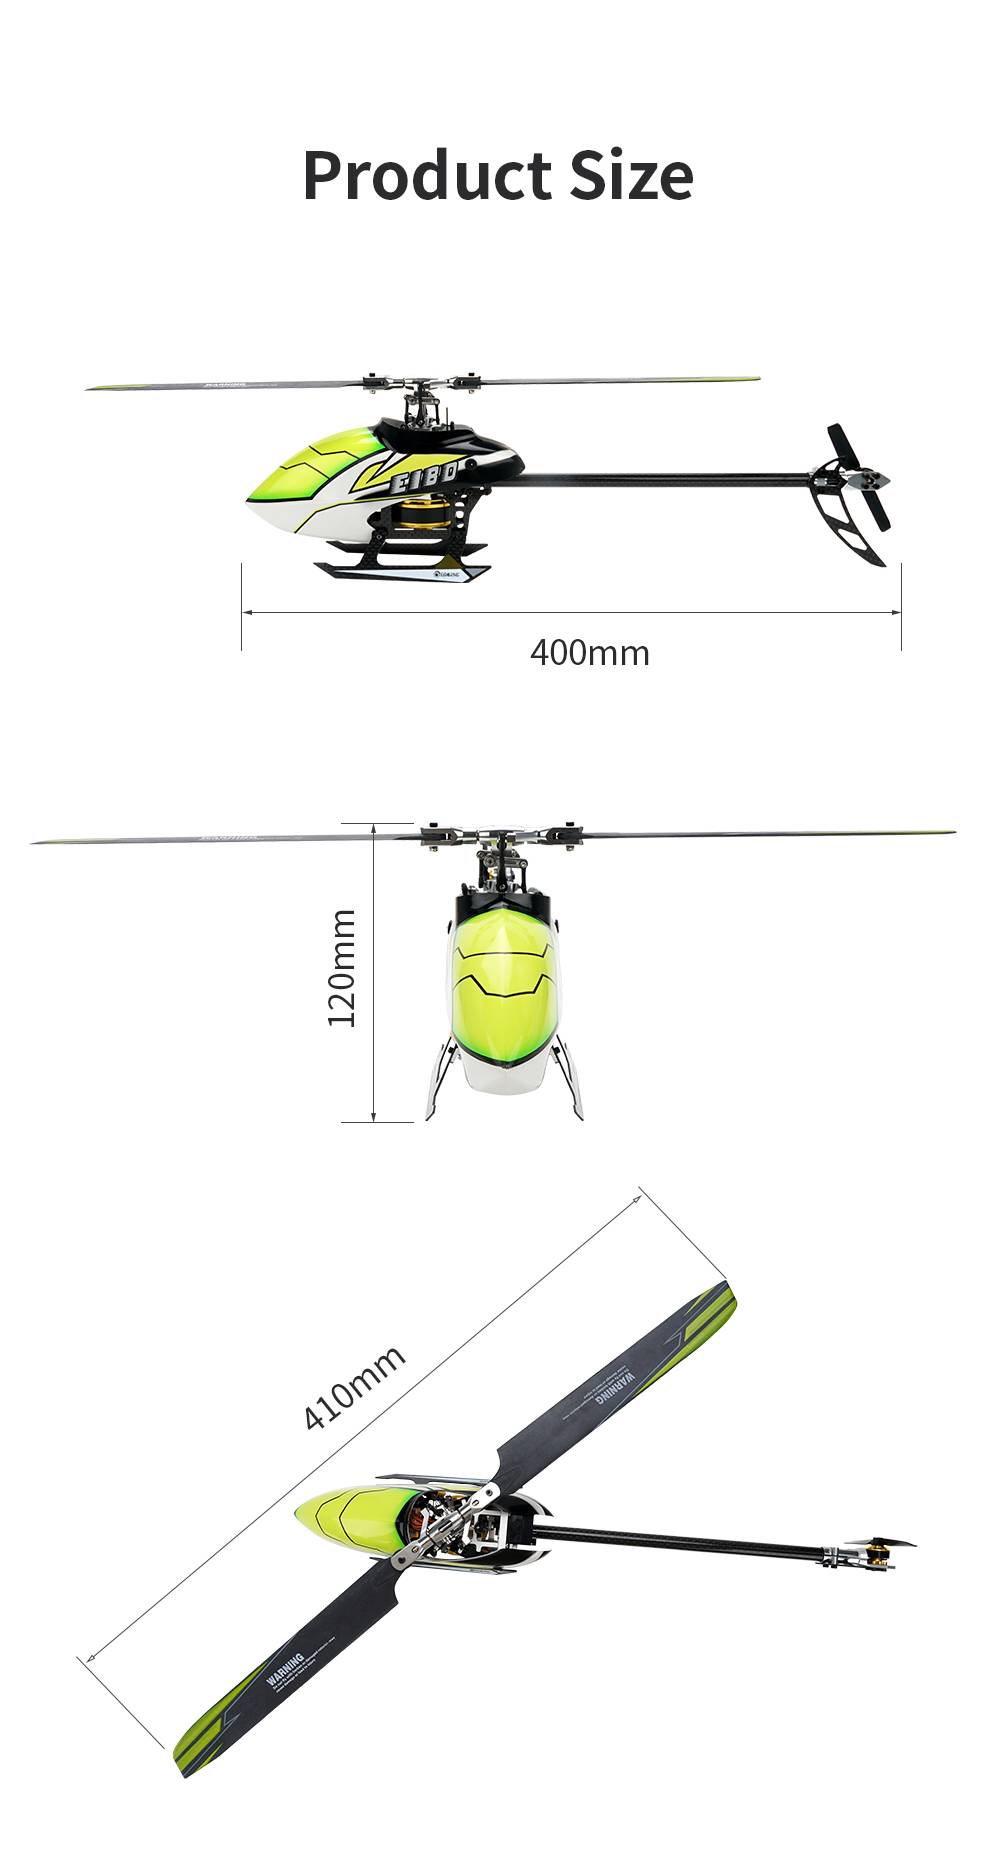 Eachine-E180-6CH-3D6G-System-Dual-Brushless-Direct-Drive-Motor-Flybarless-RC-Helicopter-BNF-Compatib-1810193-14